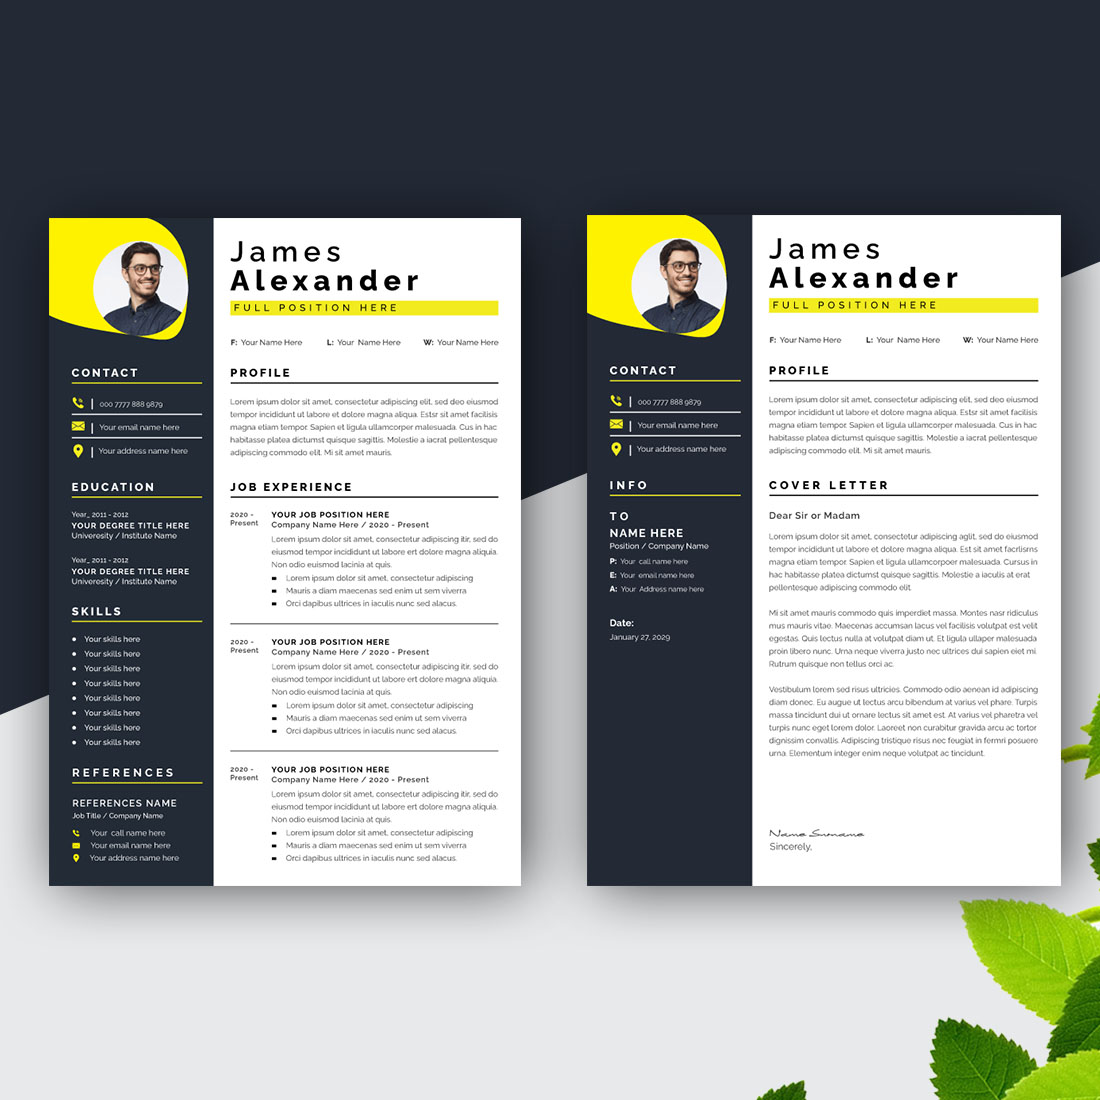 Resume Design Template with Yoello Color preview image.